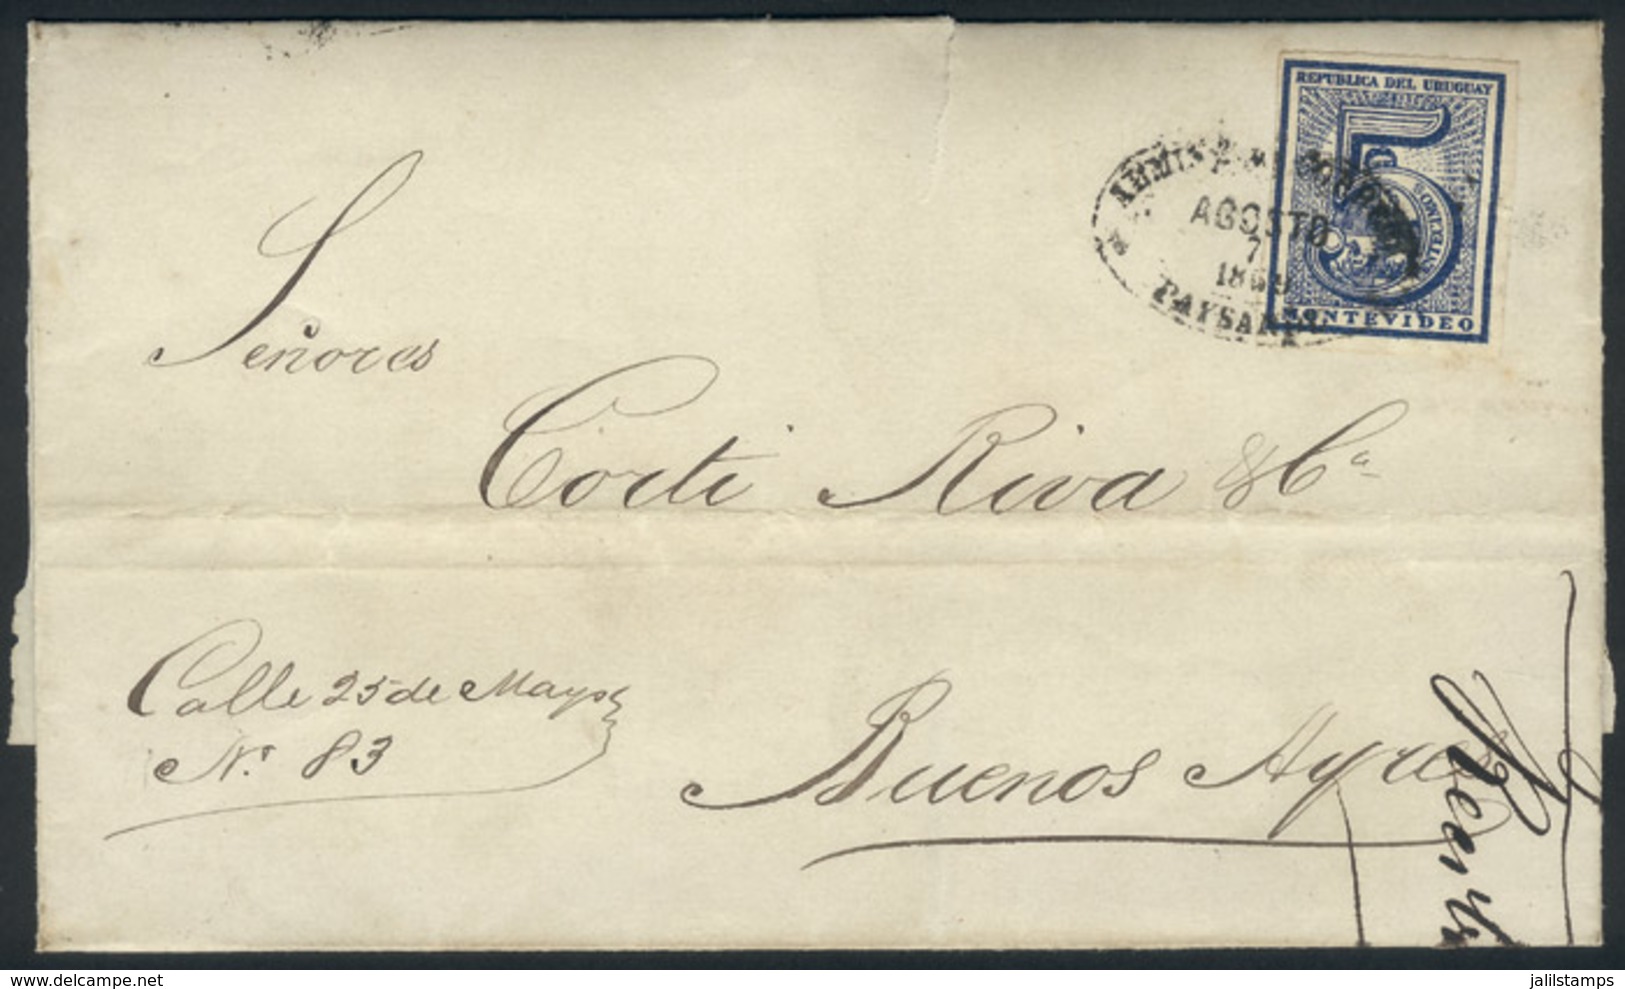 URUGUAY: 6/AUG/1869 PAYSANDÚ - Buenos Aires: Folded Cover Franked By Sc.30, Oval Datestamp Of Paysandú, Excellent Qualit - Uruguay